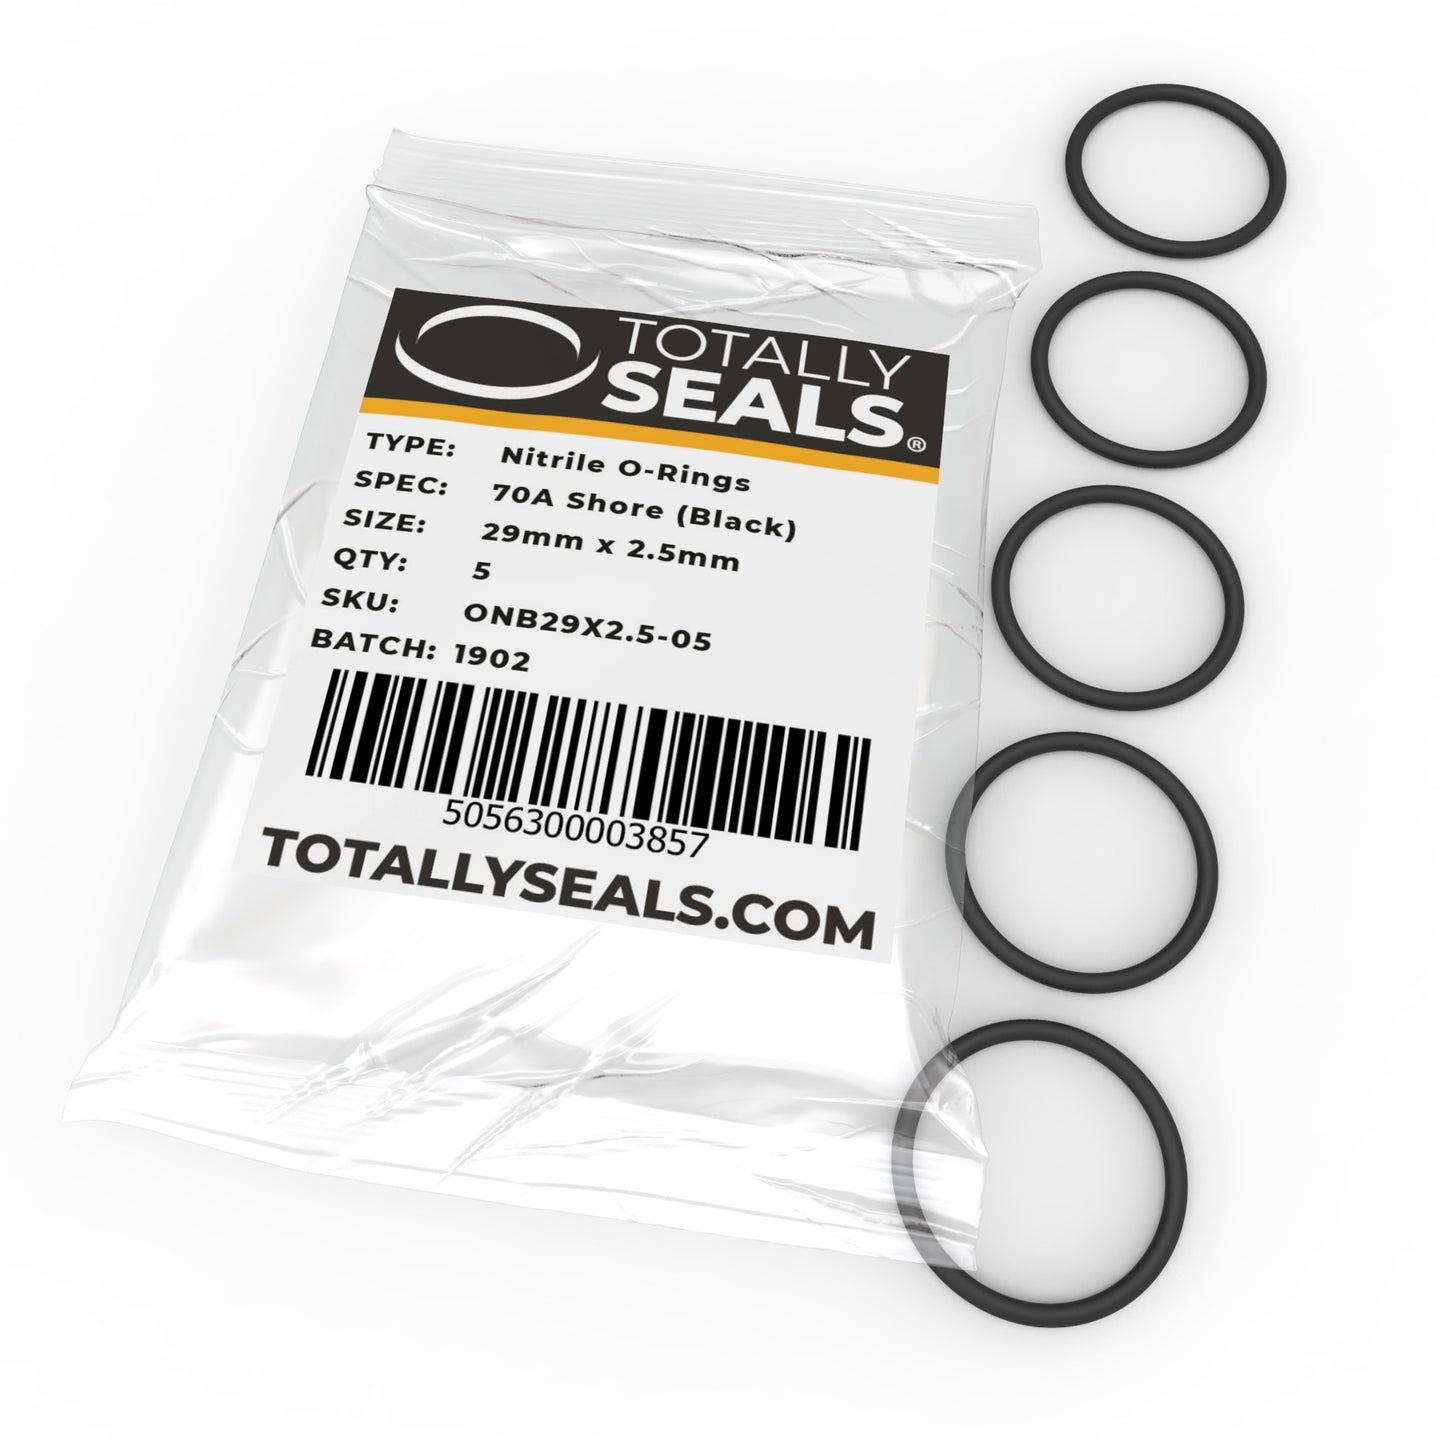 29mm x 2.5mm (34mm OD) Nitrile O-Rings - Totally Seals®